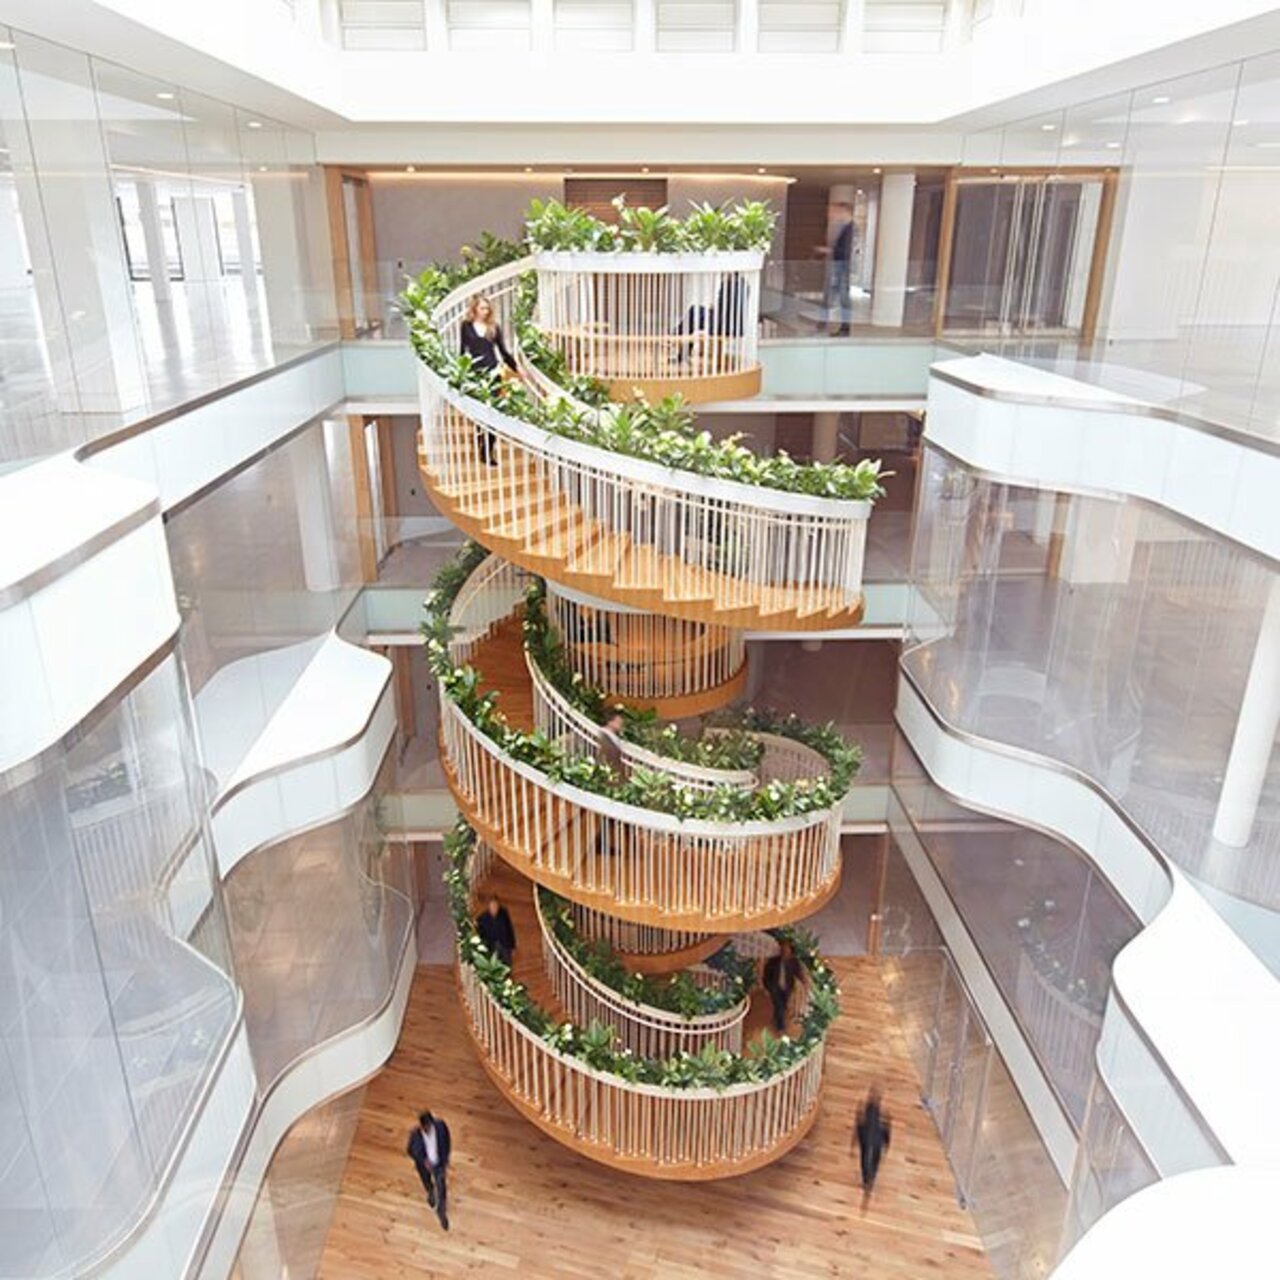 How we helped @PaulCocksedgeST deliver his vision for a living spiral #staircase: http://bit.ly/1RZV34U https://t.co/FwseW5kv1i